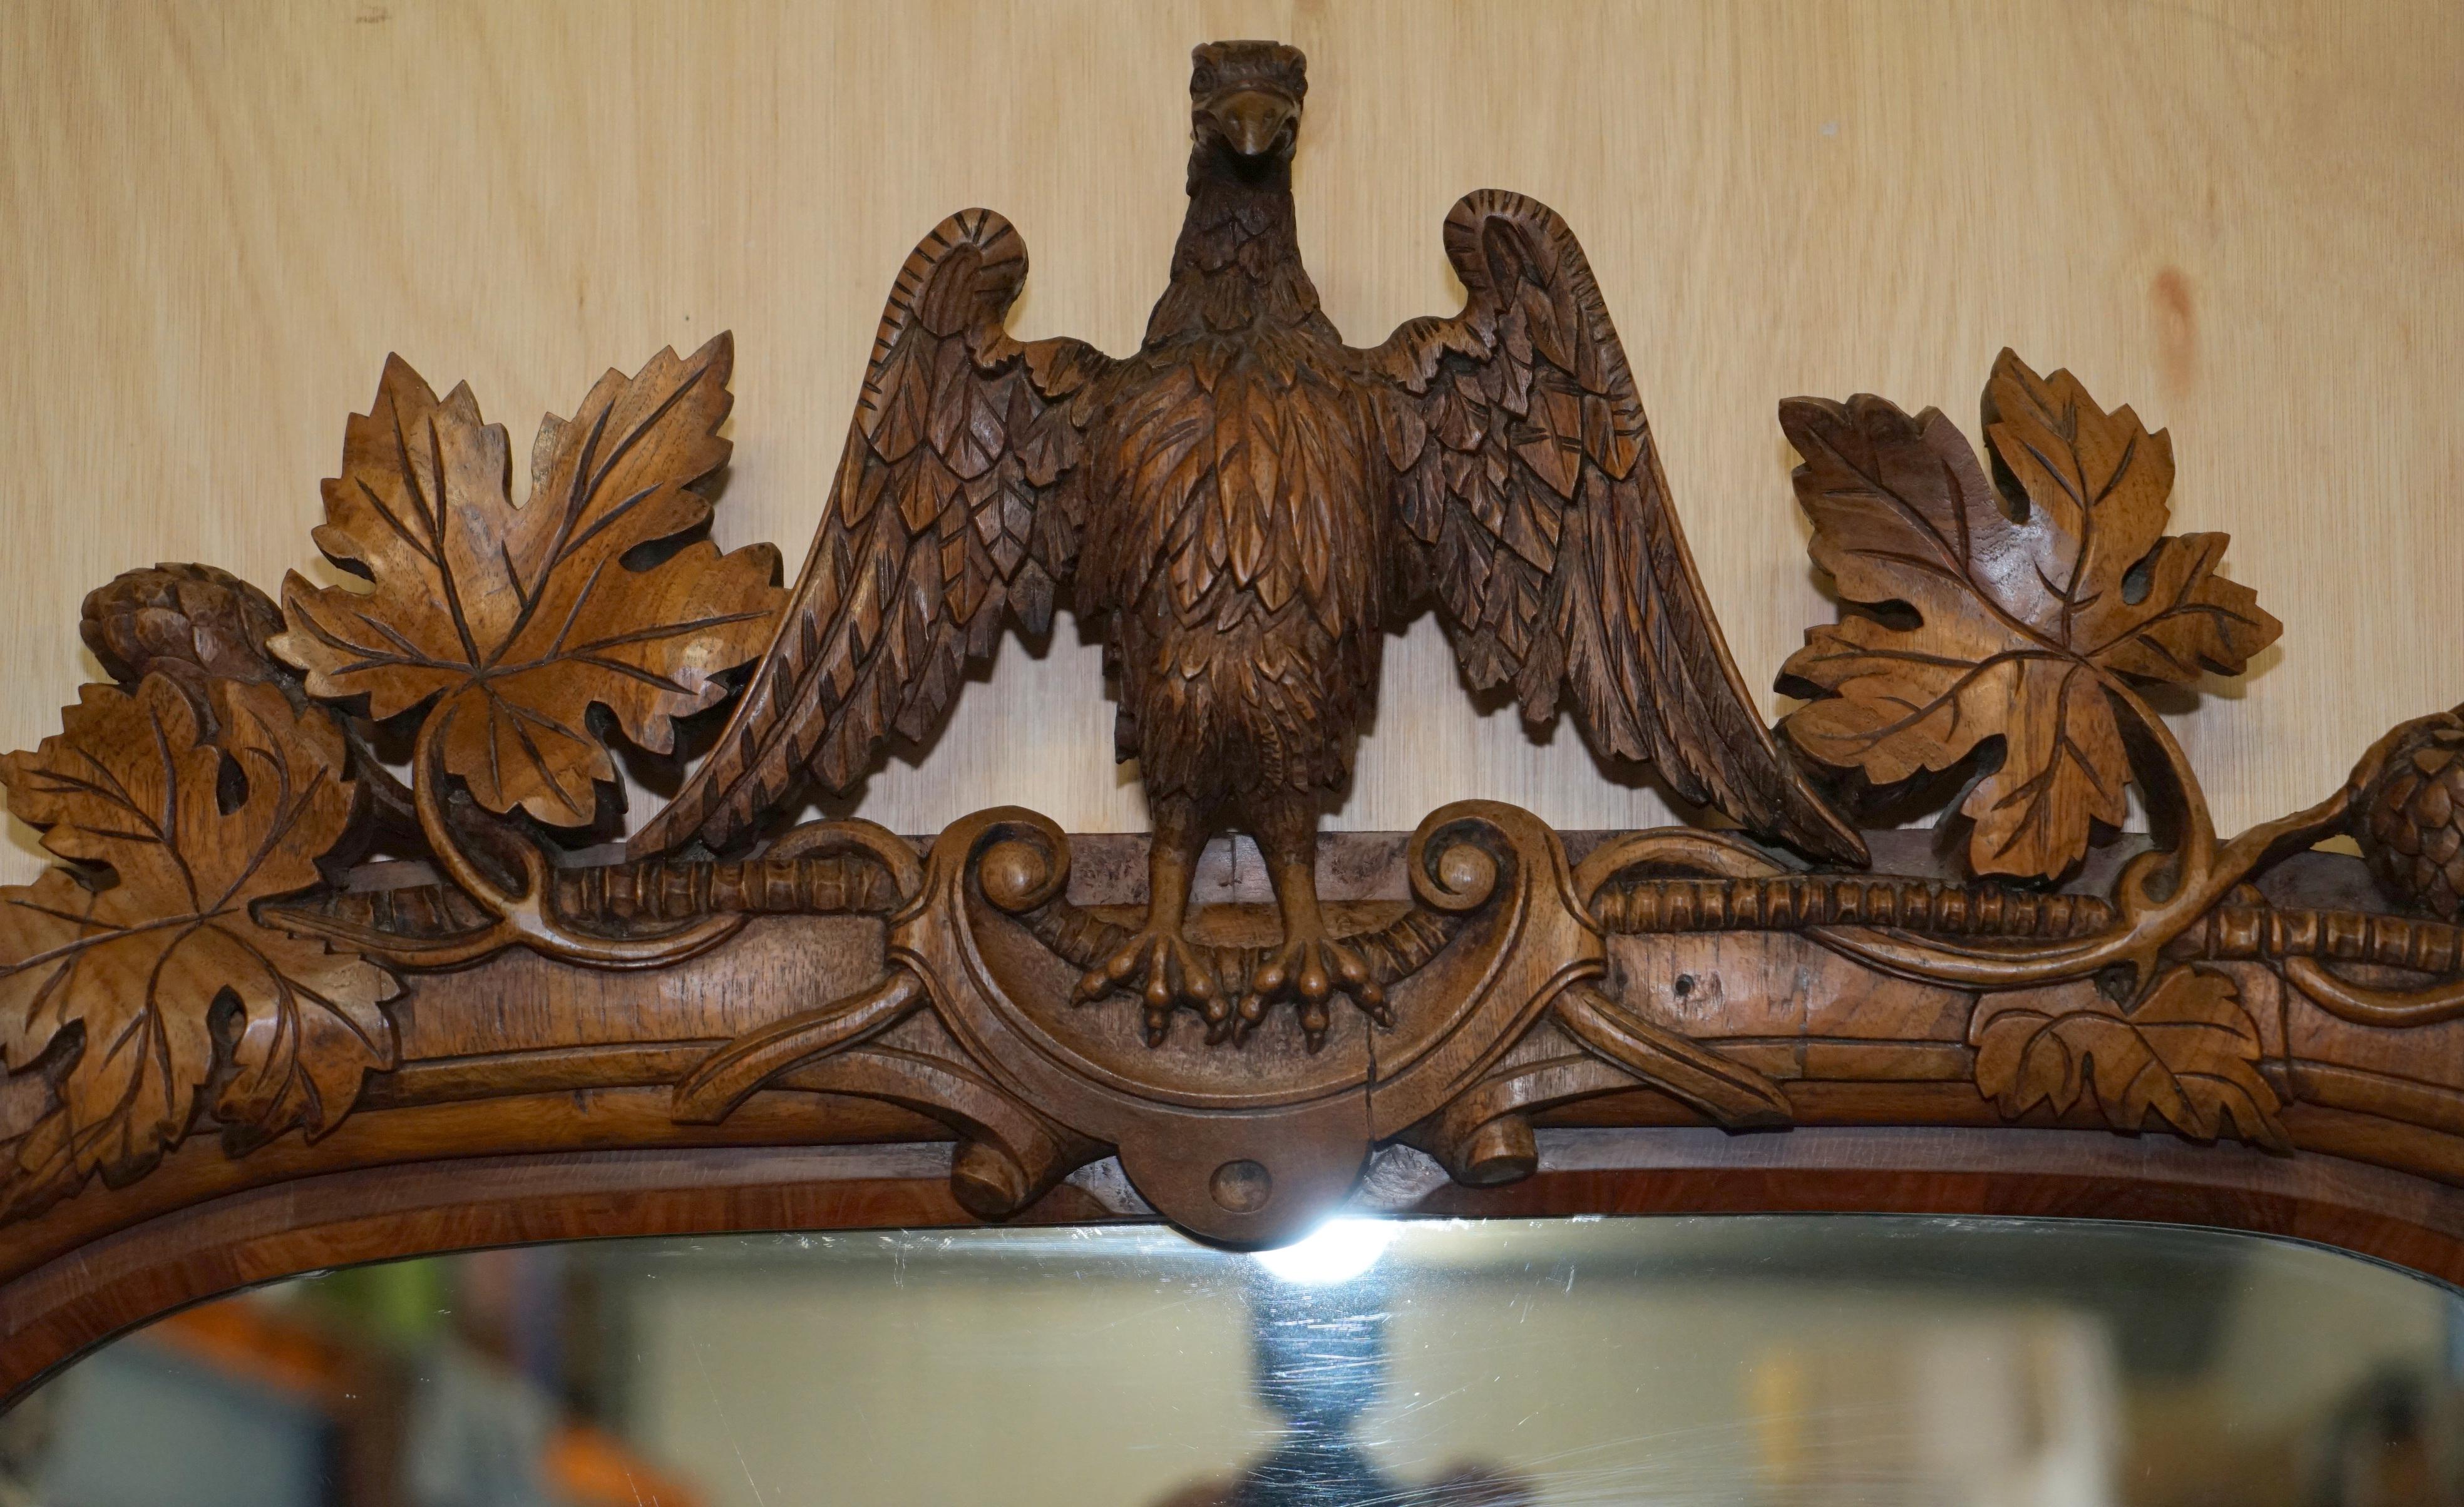 English STUNNING ANTIQUE ViCTORIAN HAND CARVED CIR 1860 AMERICAN EAGLE OVERMANTLE MIRROR For Sale